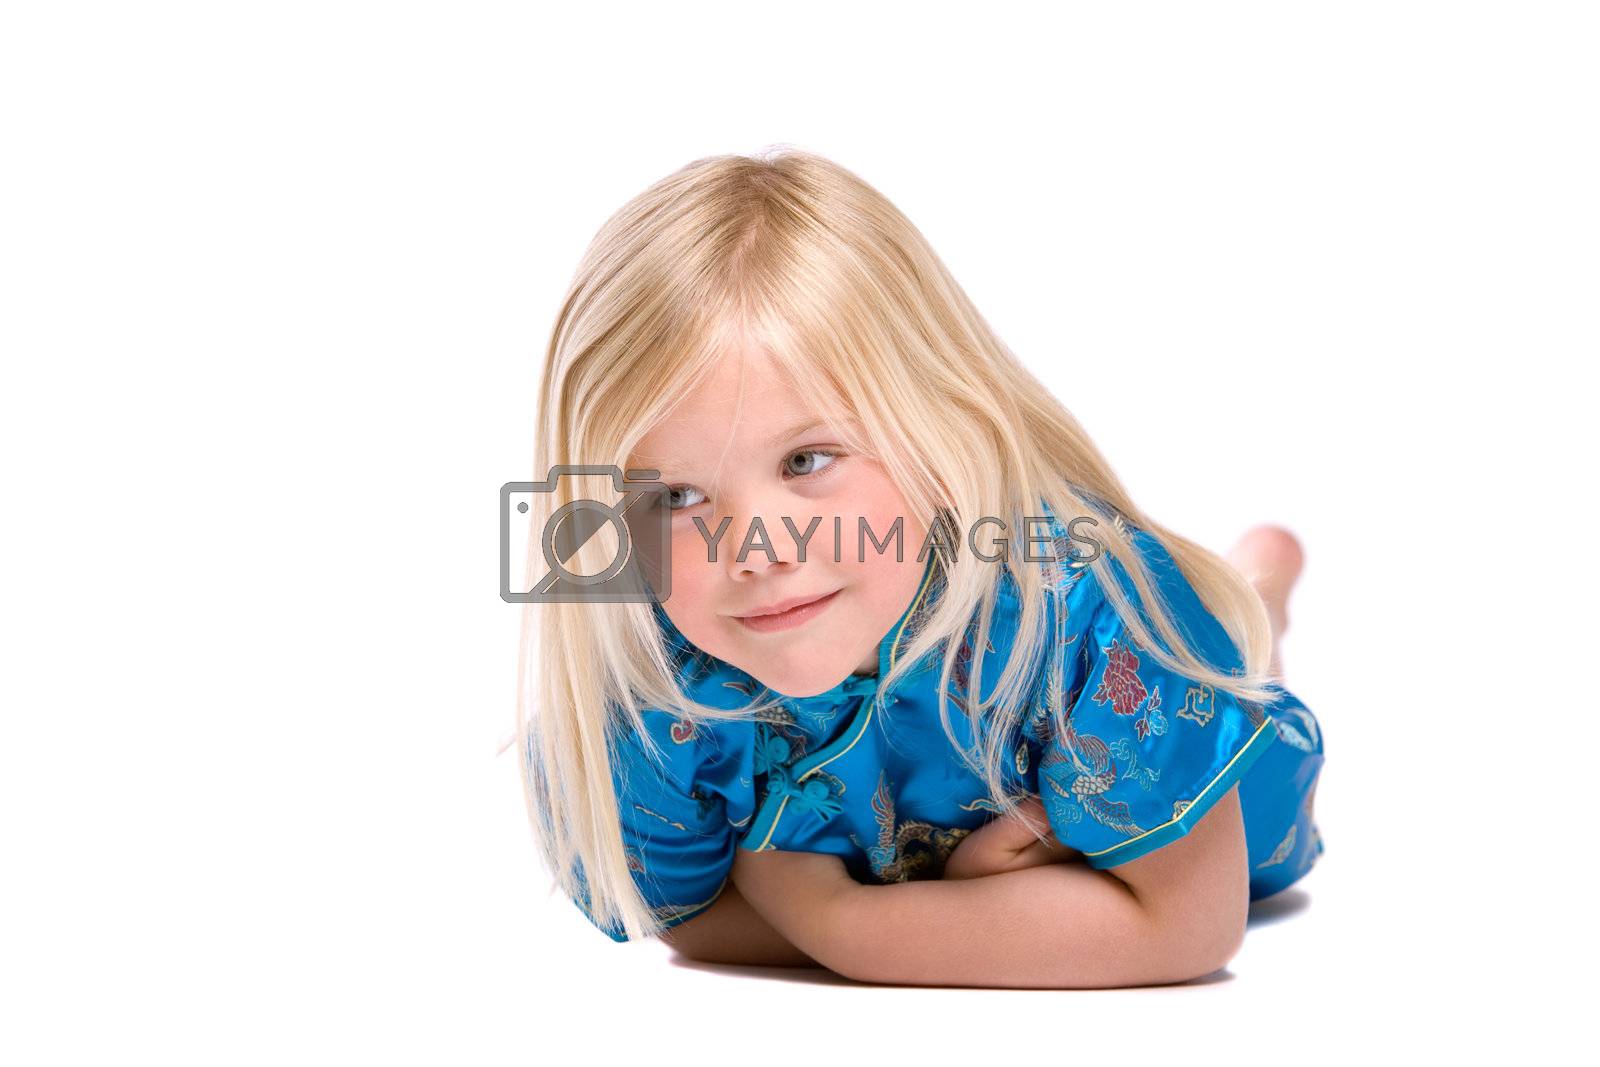 Royalty free image of Four year old girl by Fotosmurf